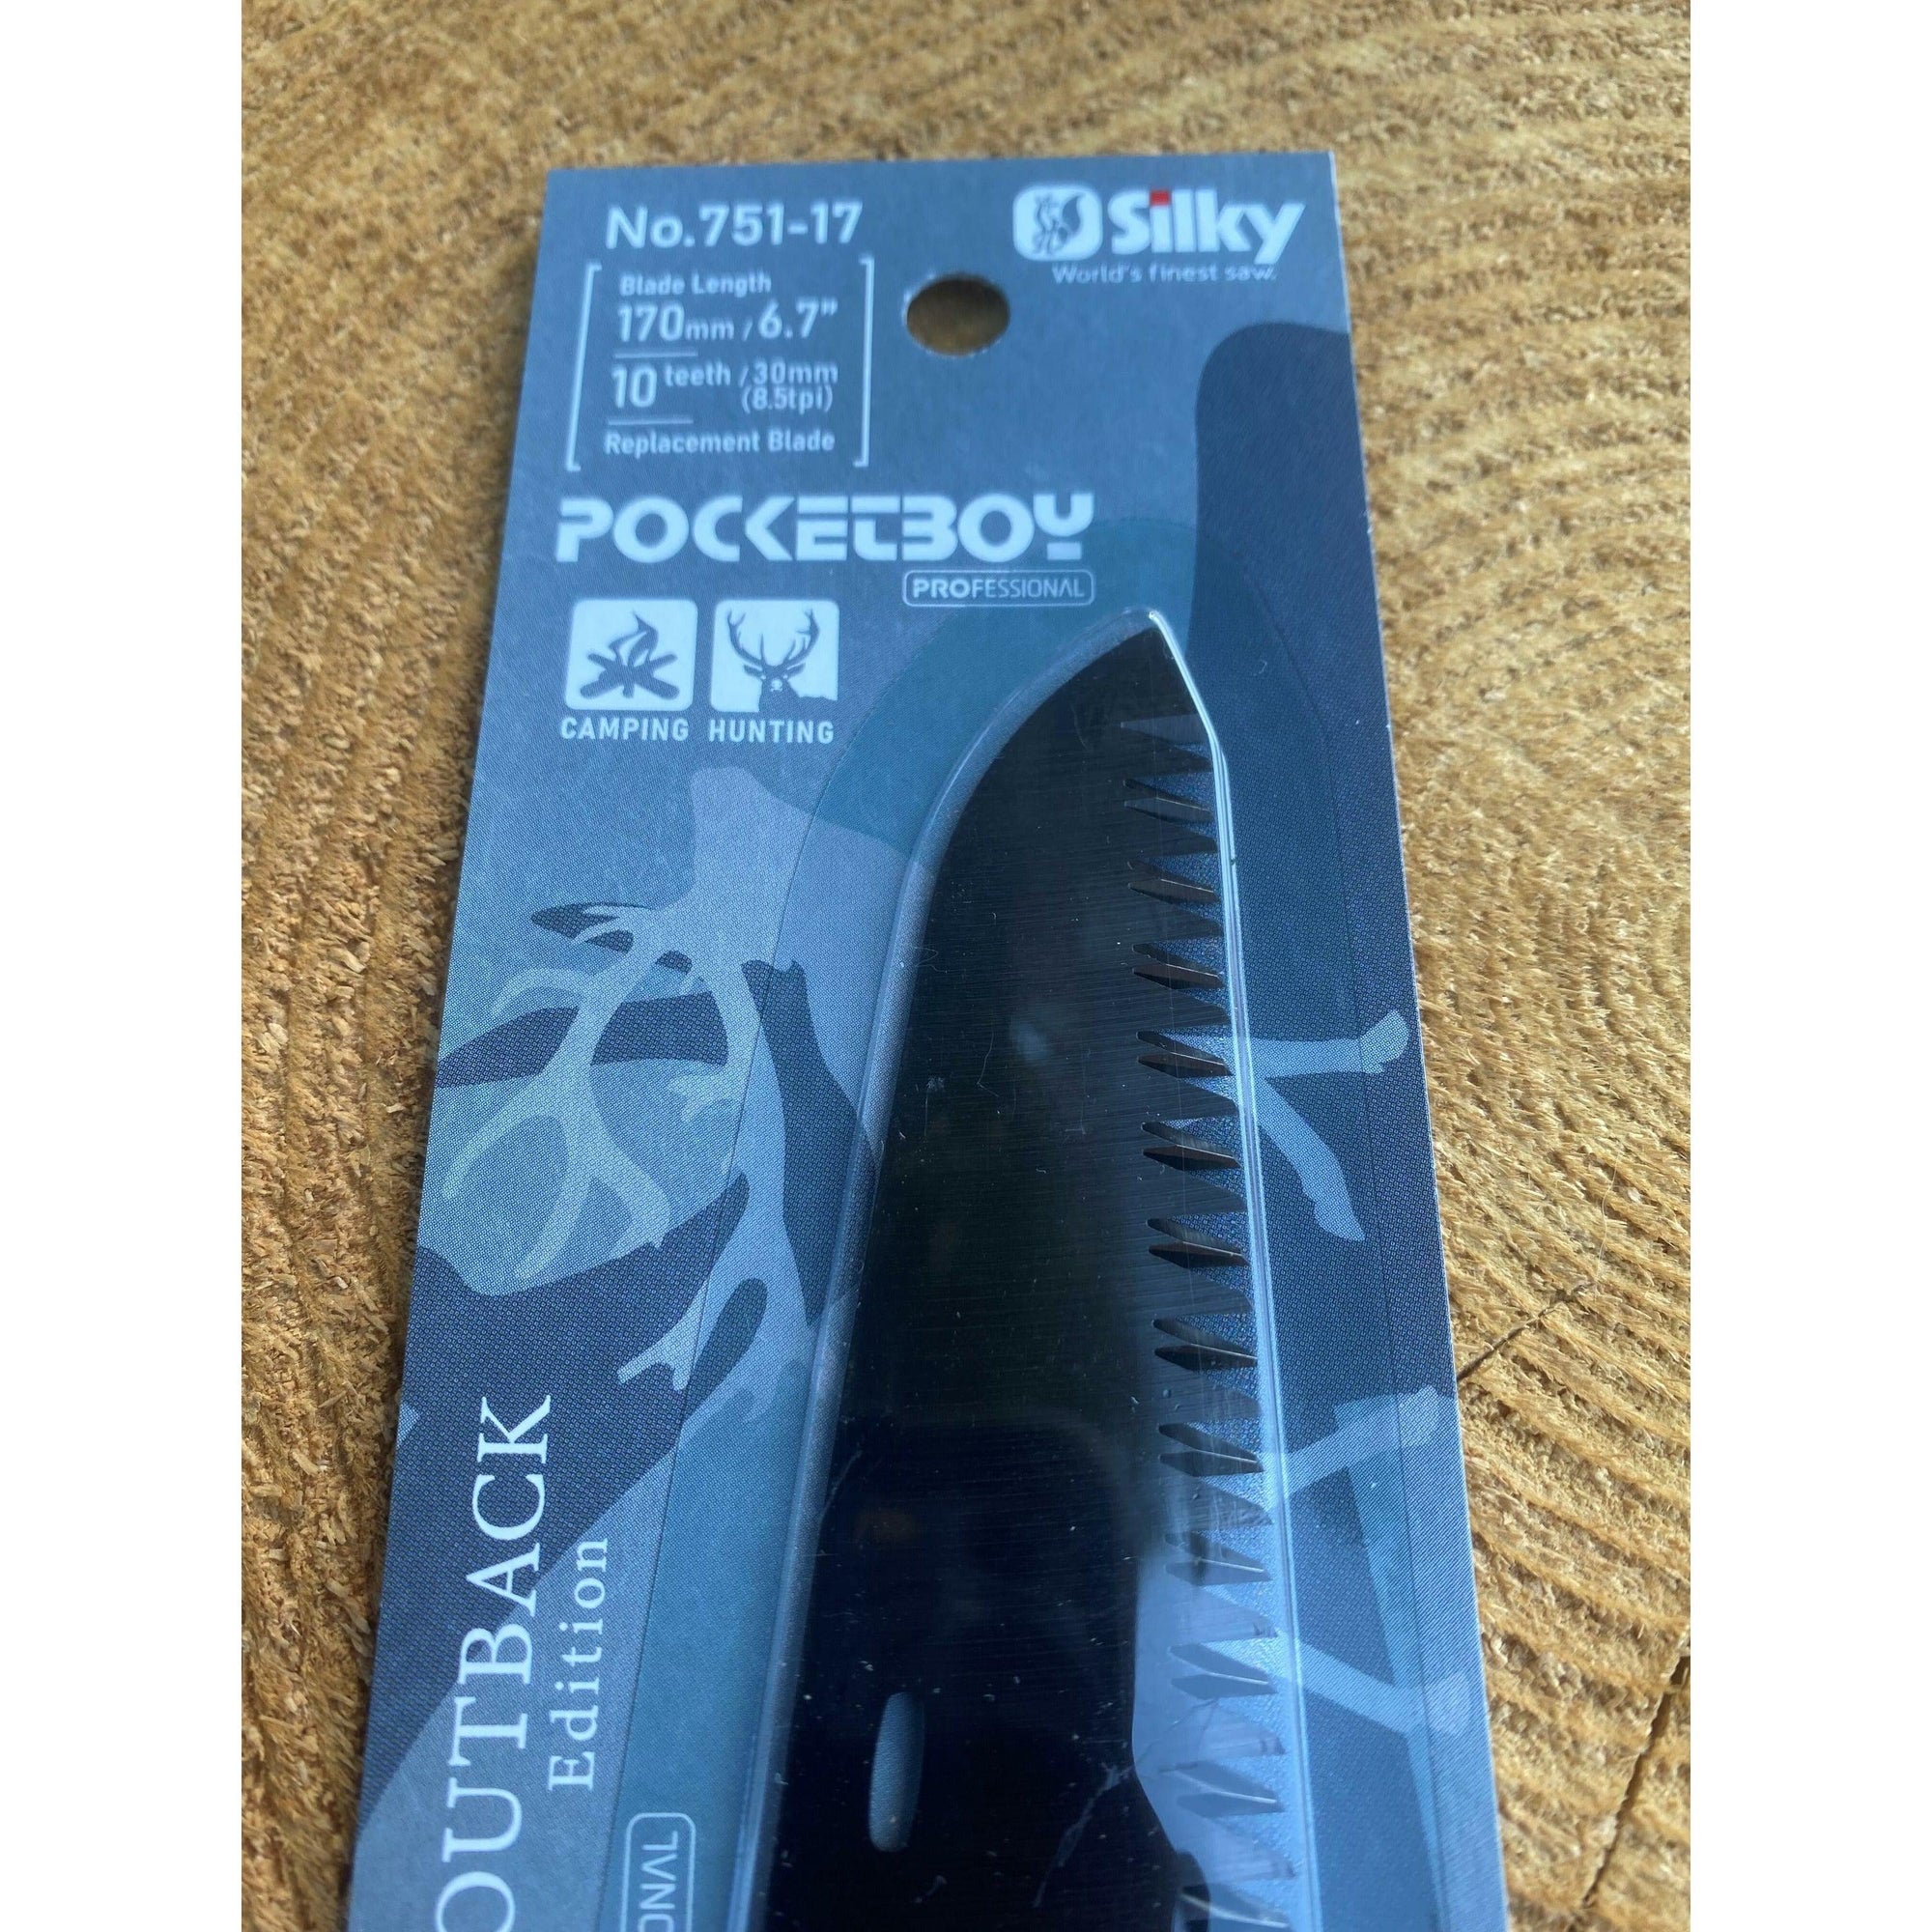 POCKETBOY OUTBACK Edition Replacement Blade - Axeman.ca